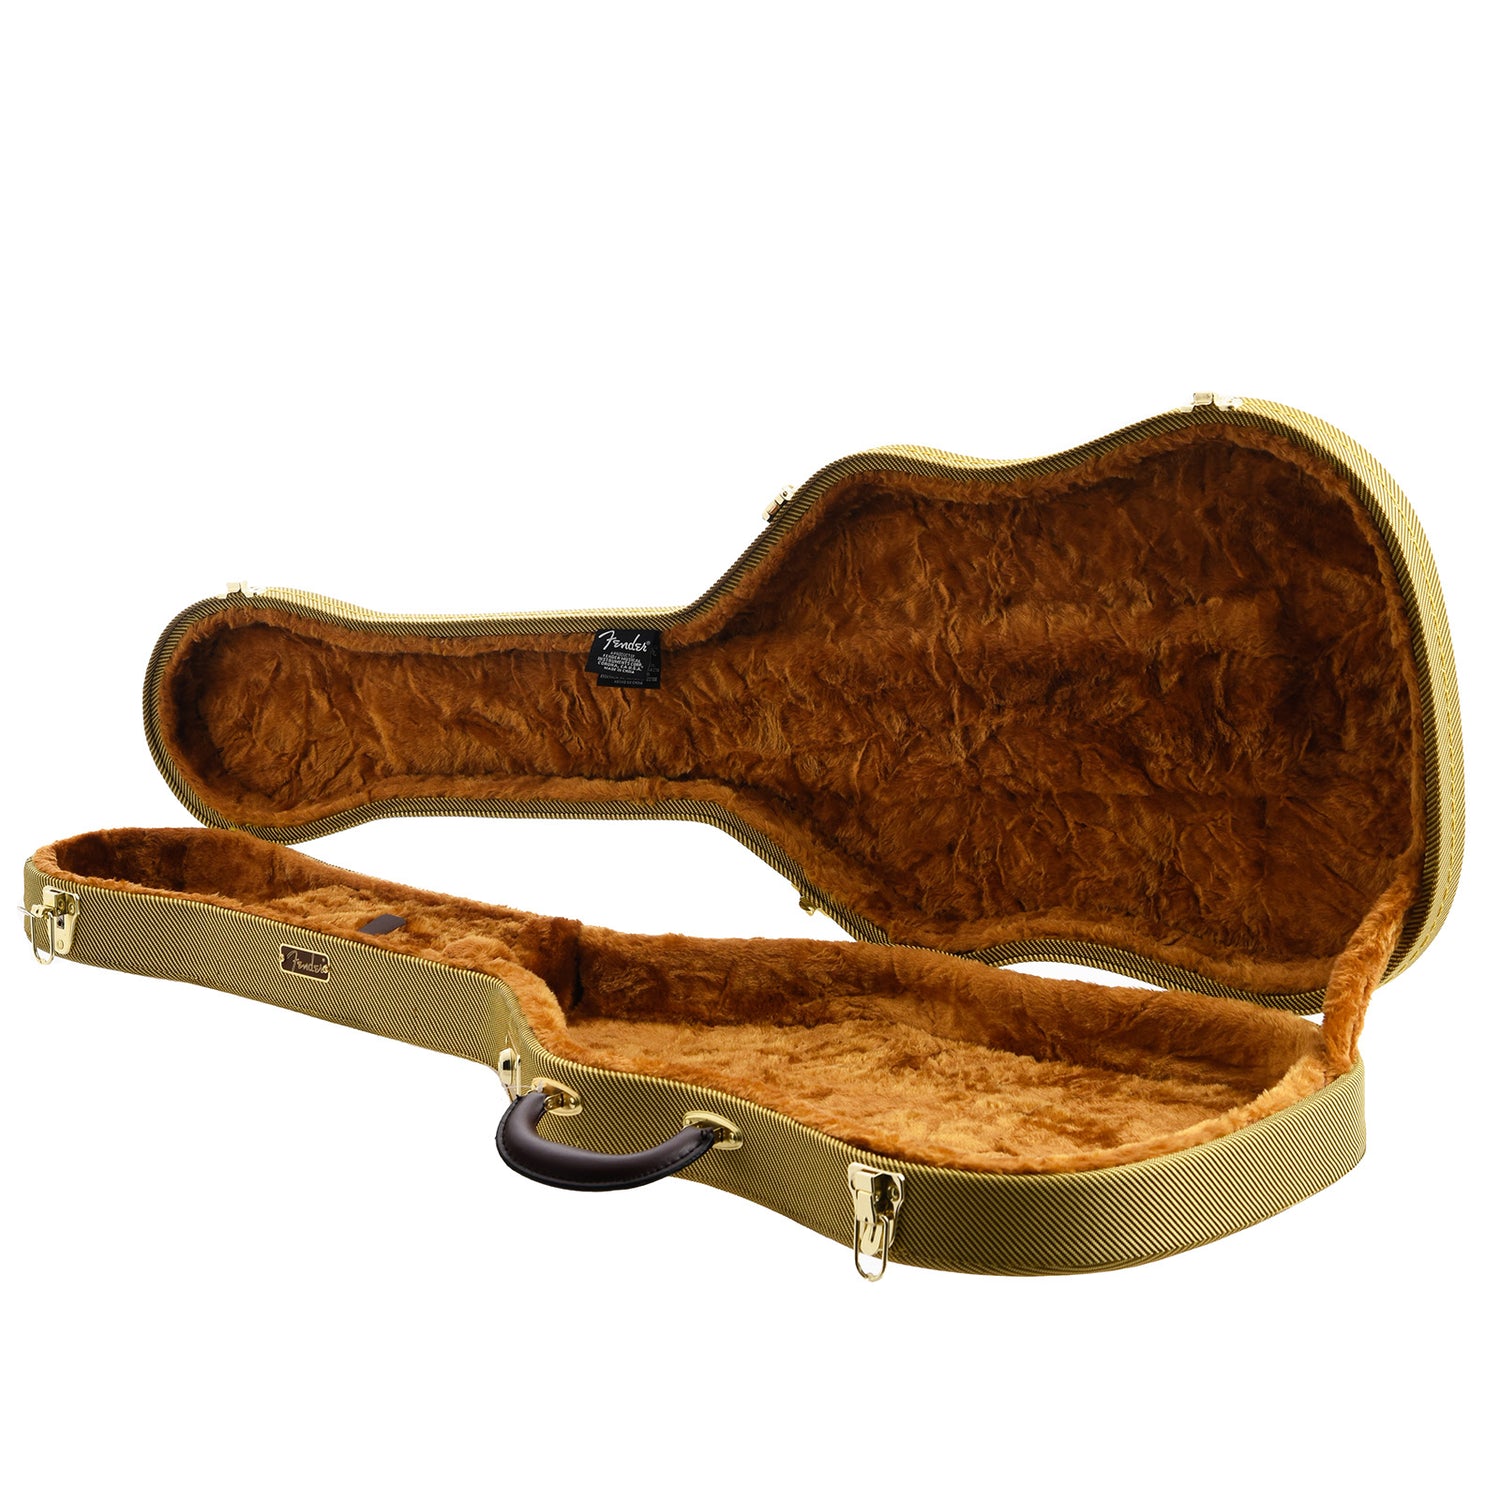 Fender Telecaster Tweed Thermometer Case